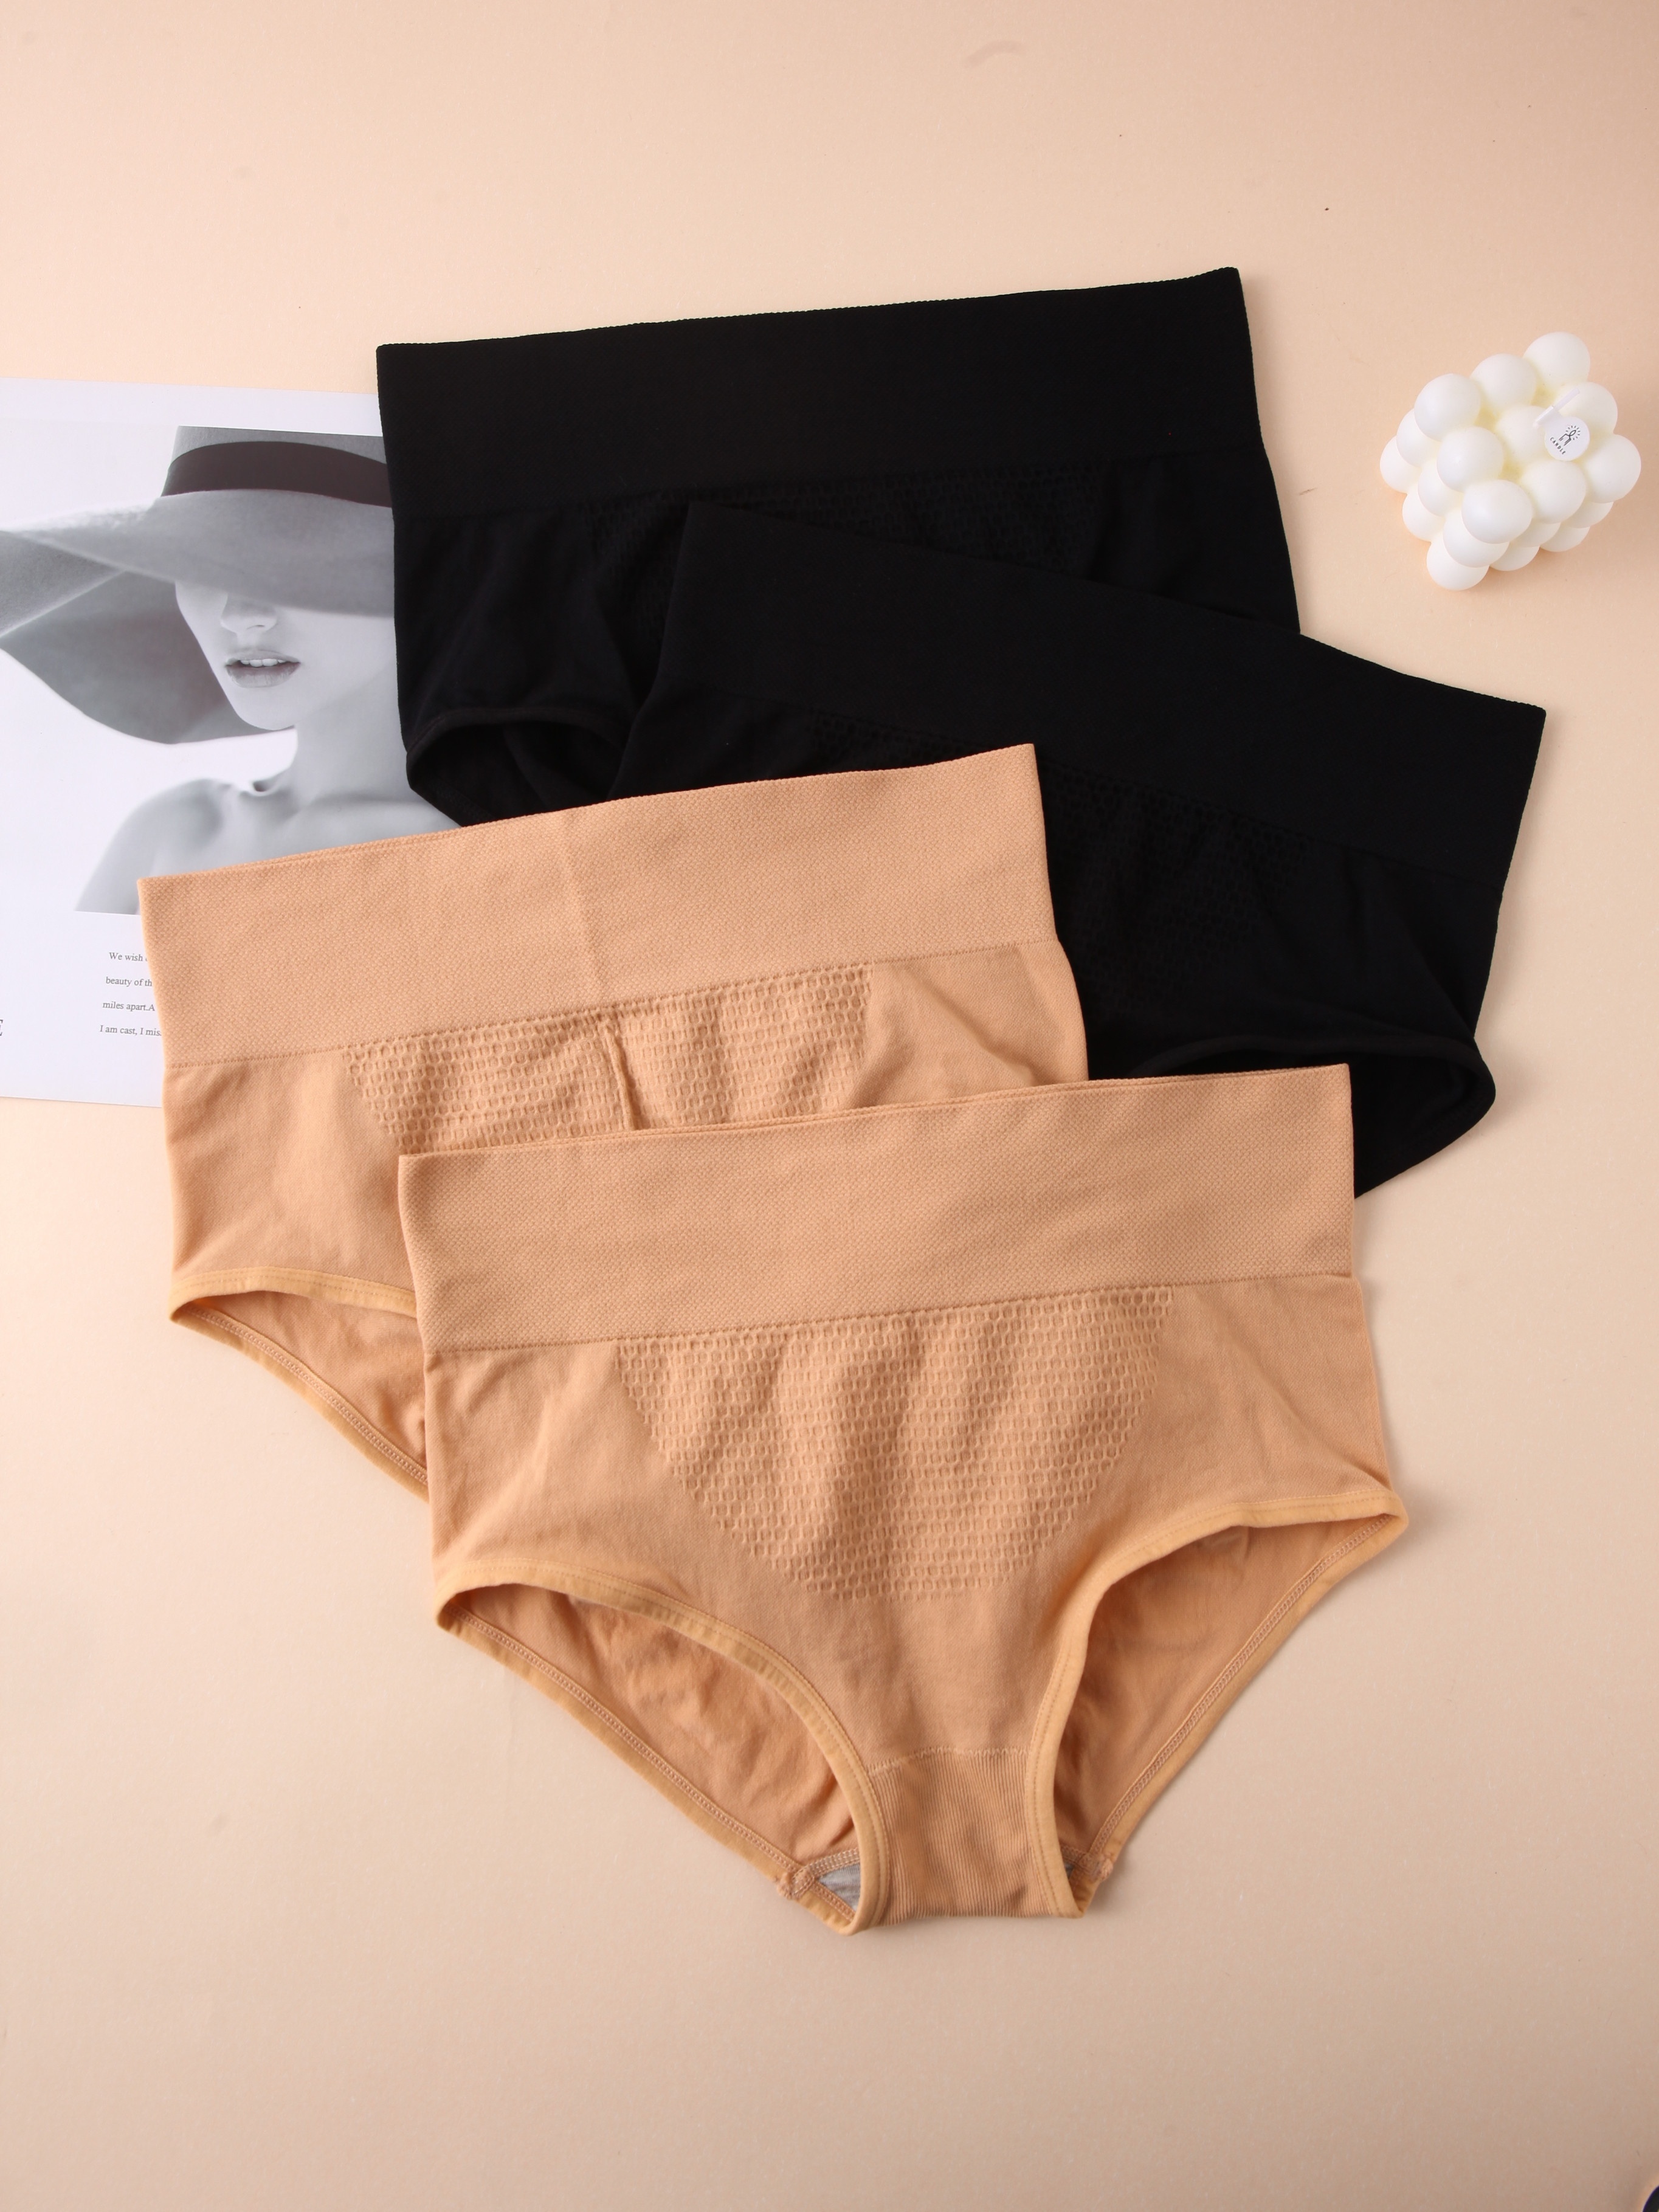 Undergarments for Dresses Ladies Comfortable Shaping High Waist In Pants  Postpartum In Waist Beauty Lifting Pants Breathable In Bottomless Underwear